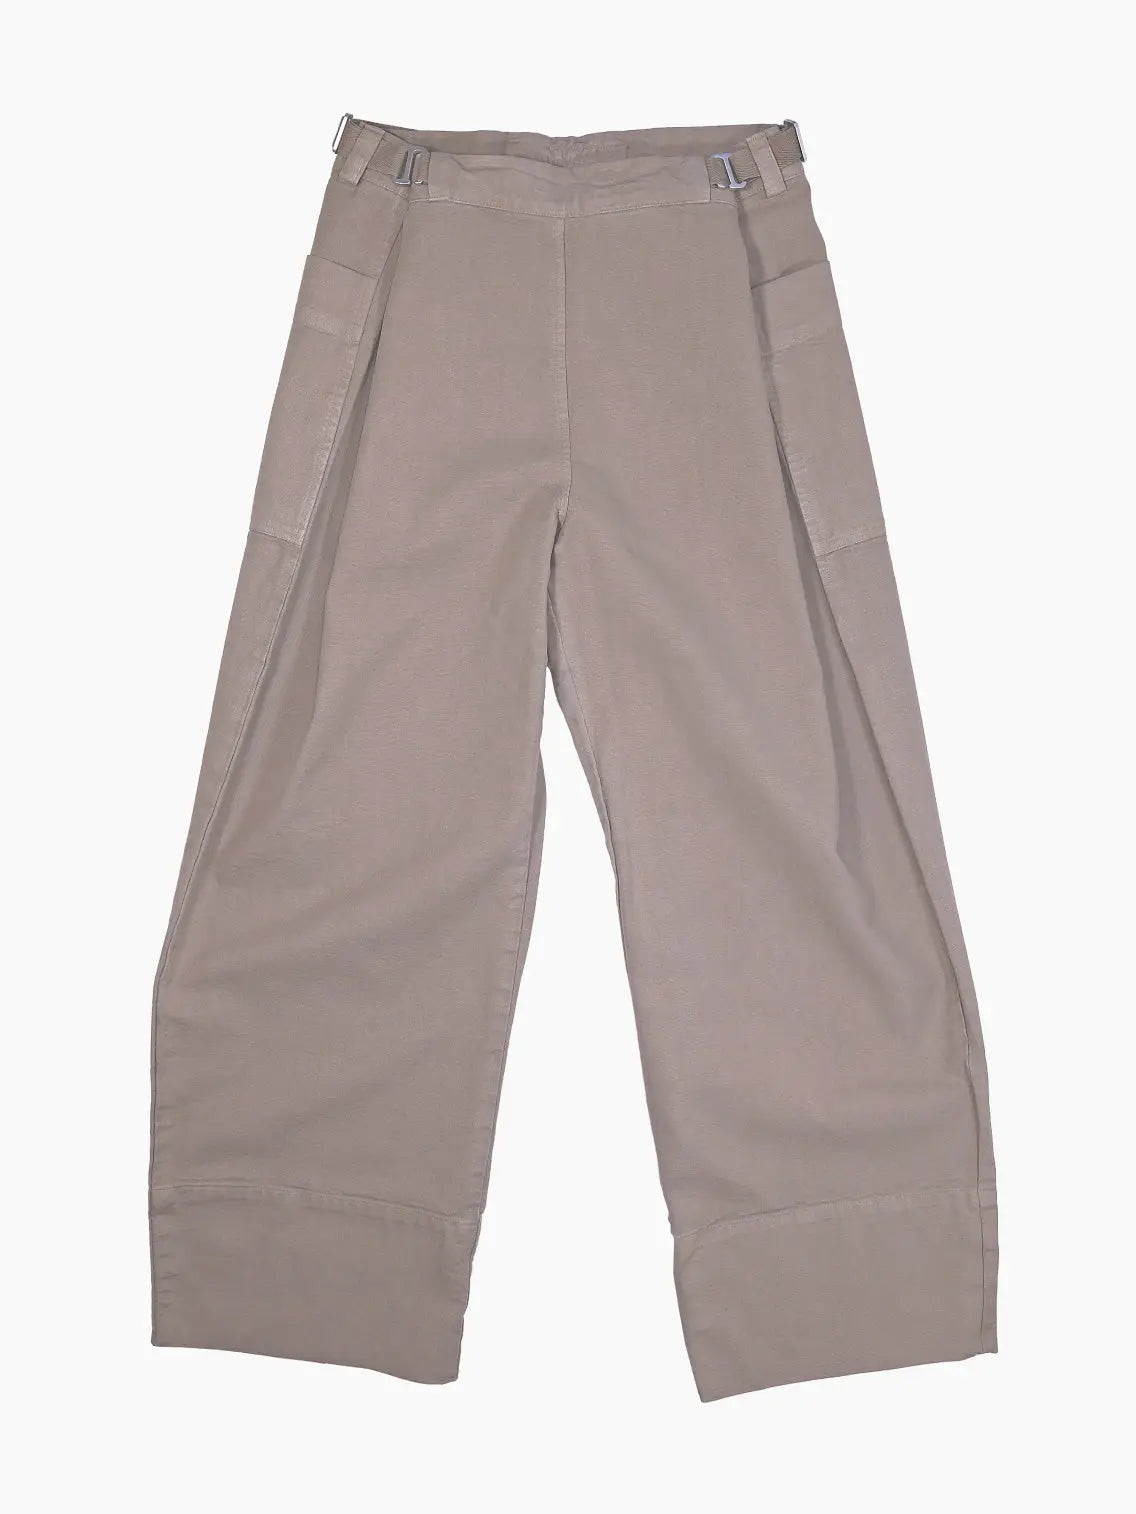 A pair of Khaki Pants designed with adjustable buckles on the waistband by Bastida x Bassal Store. The pants feature front pockets and a relaxed fit, made from a soft, comfortable fabric. Available exclusively at BassalStore in Barcelona.